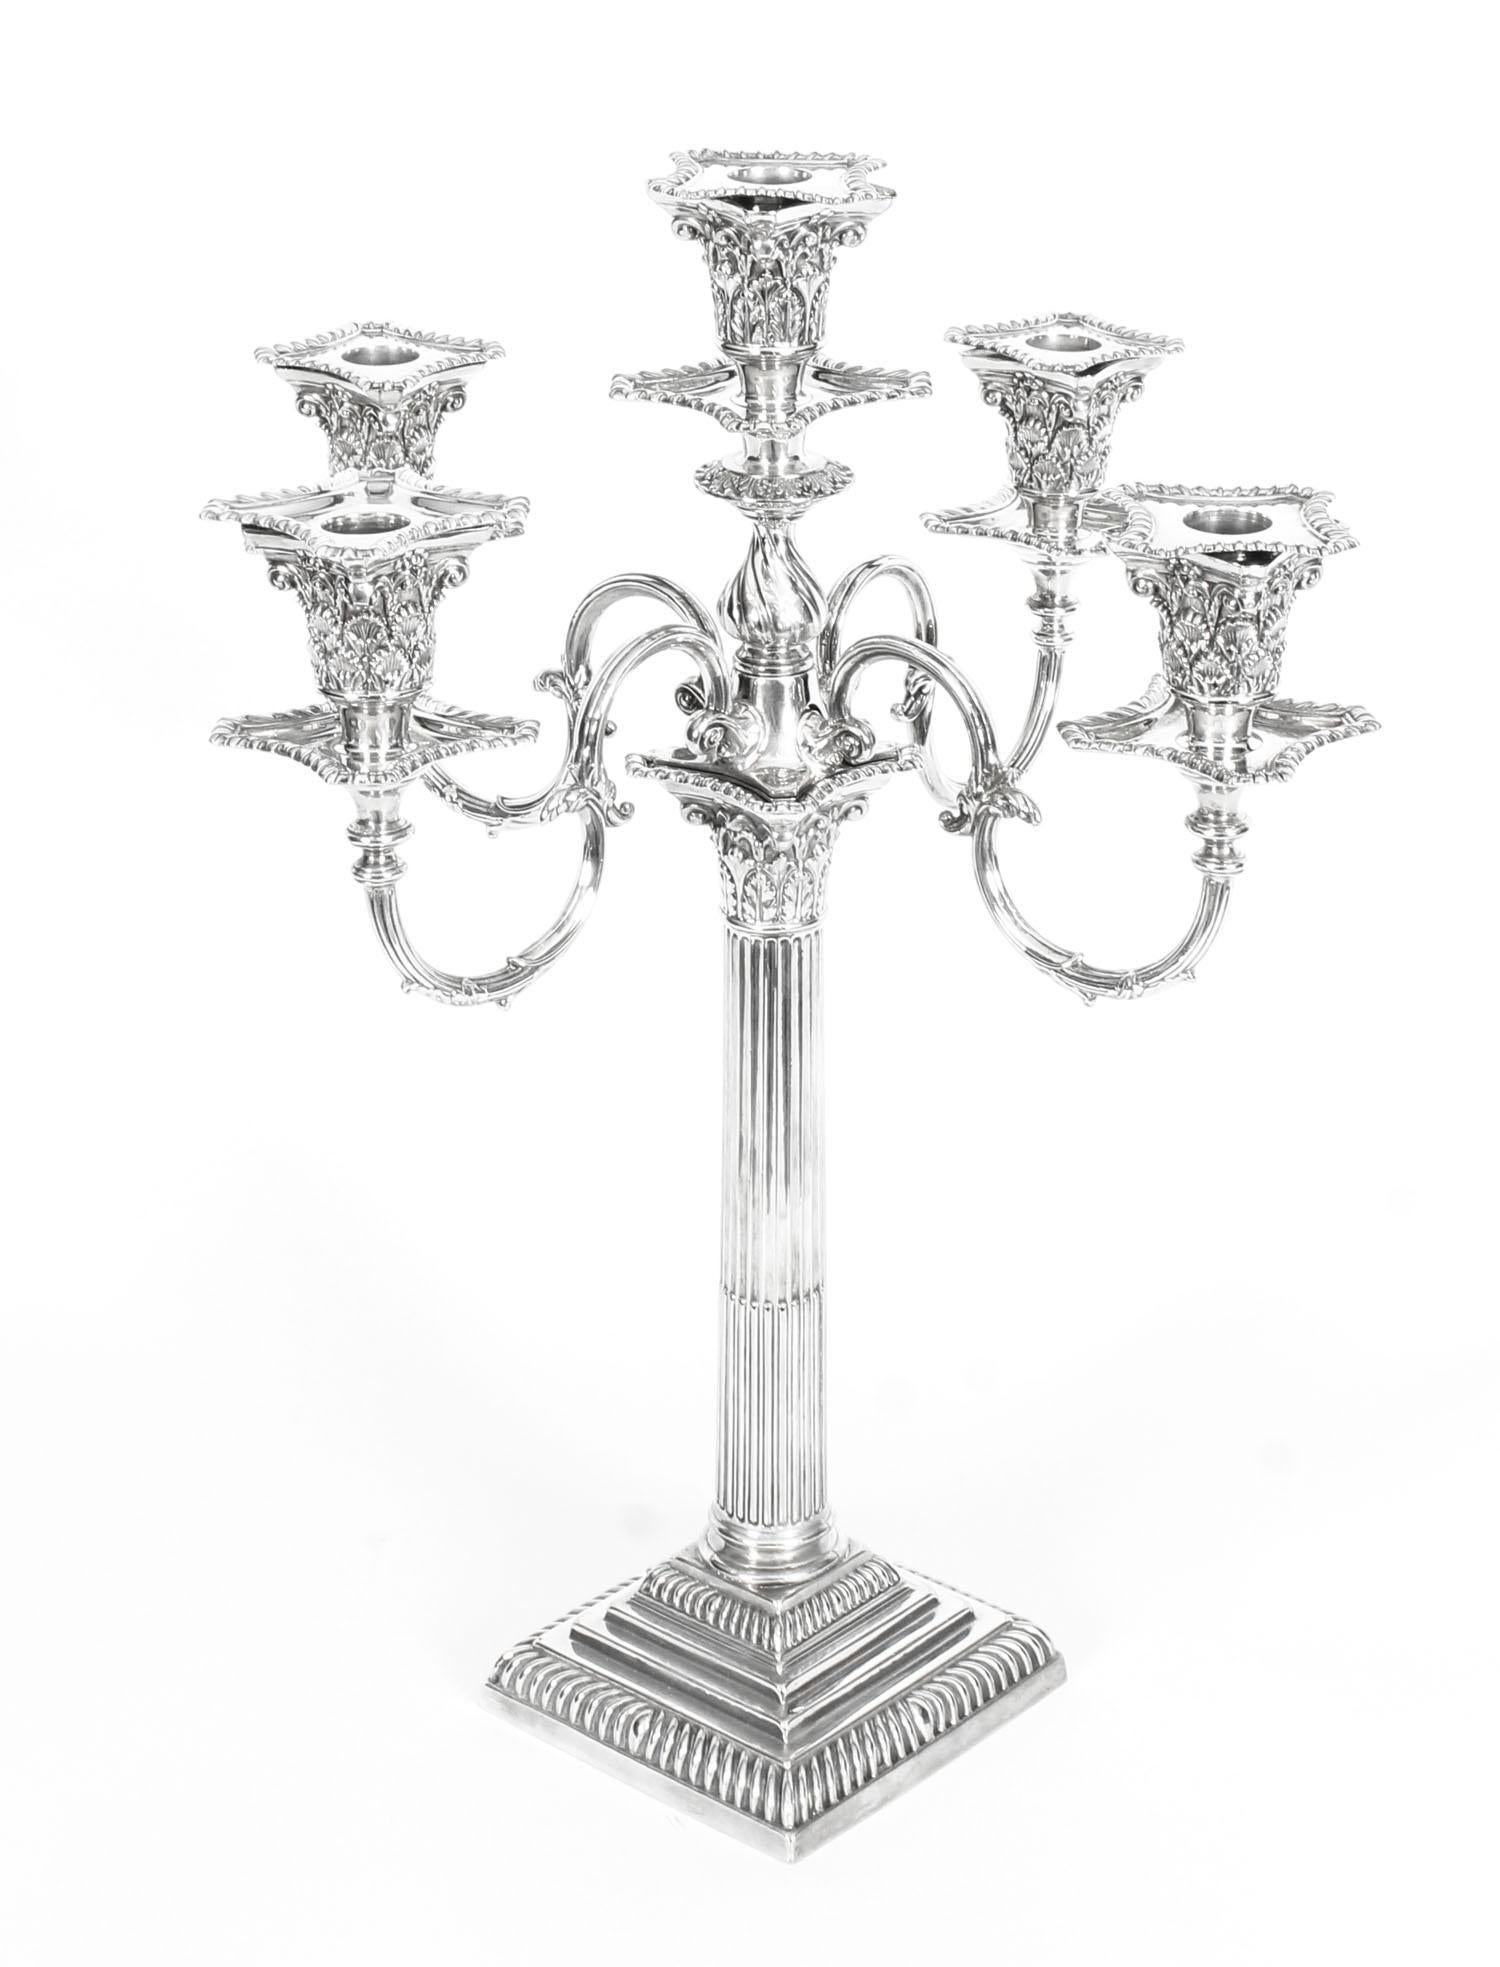 This is a magnificent high-quality pair of antique English Victorian silver plate five-light candelabra, each bearing the maker's mark of the renowned silversmith, Mappin & Webb - Princes Plate, silversmith to Her Majesty the Queen and to His Royal